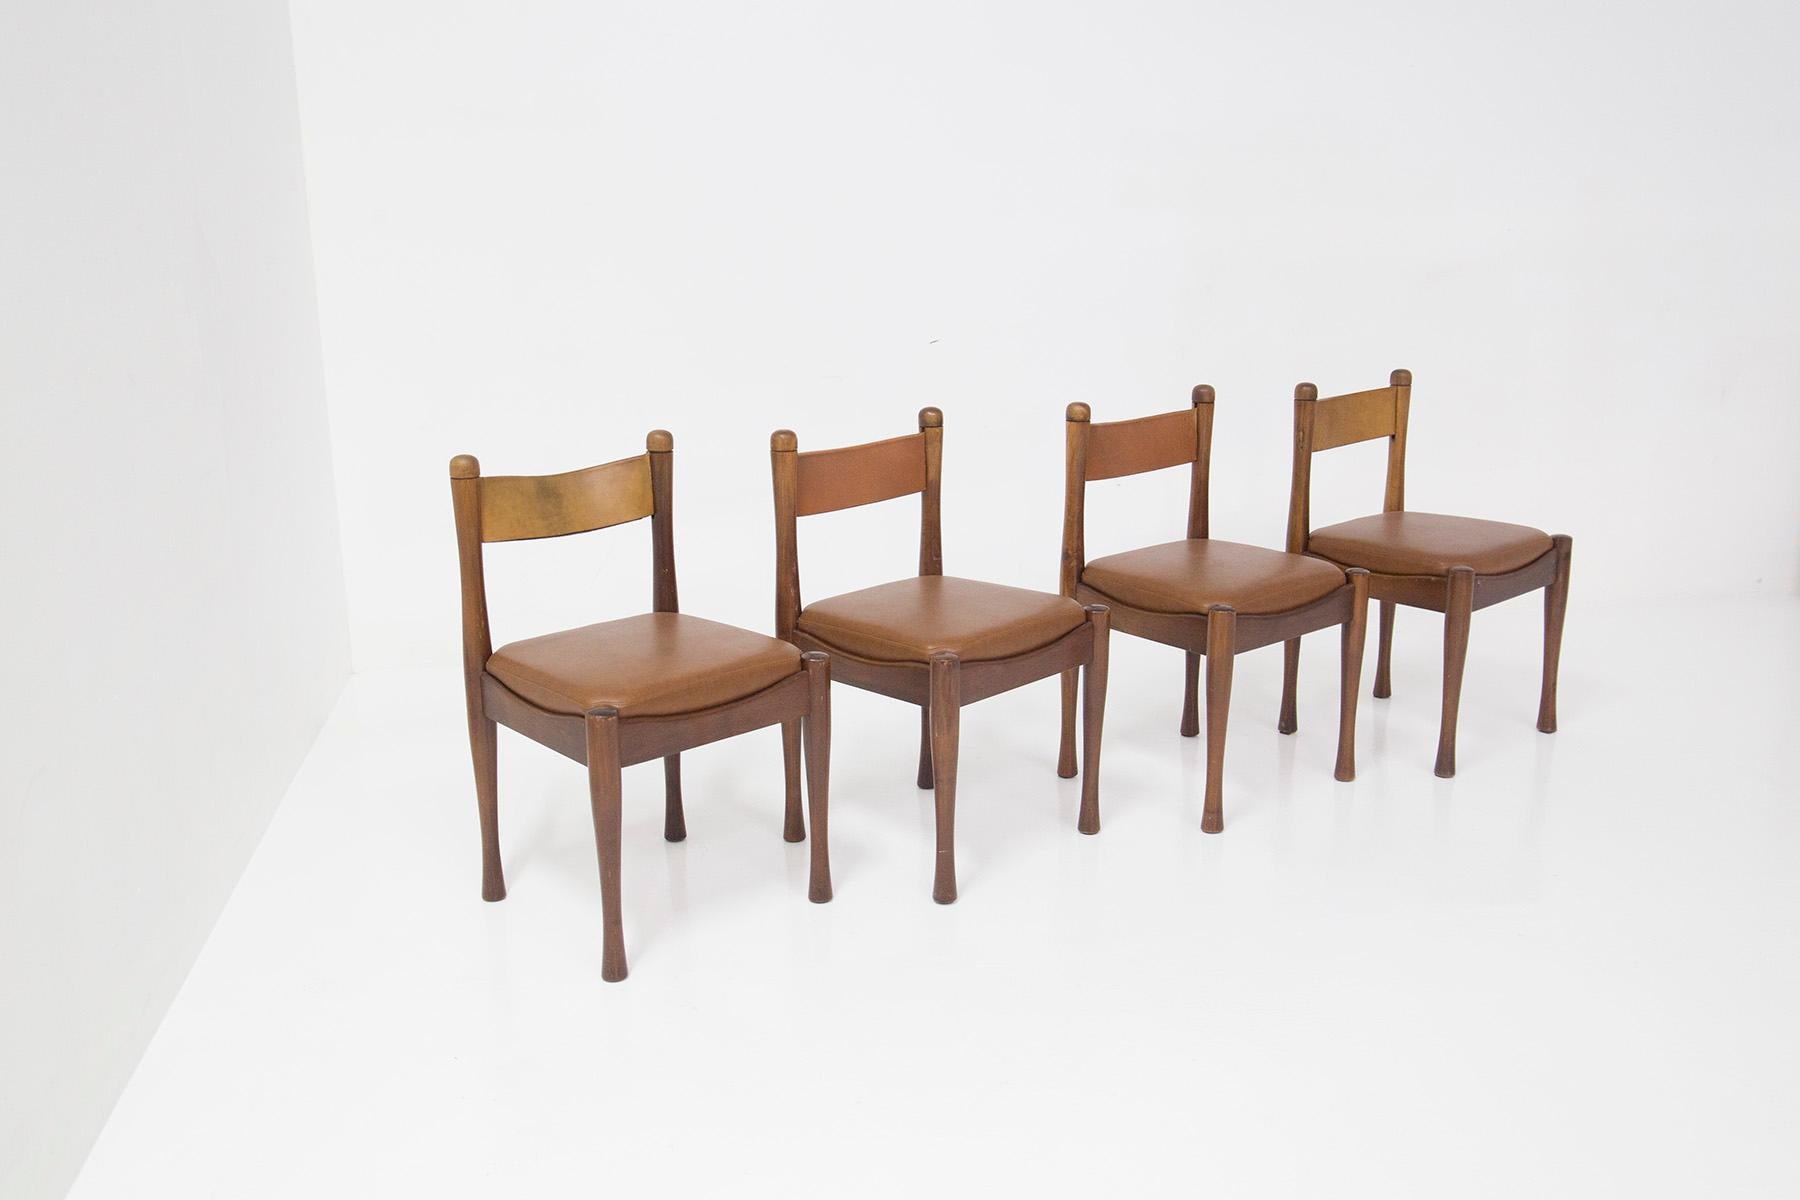 Elegant Set of 4 chairs designed by Silvio Coppola for the Italian manufacture Bernini. Below the chair we find its original manufacturer's label. Made in 1970. Sturdy wooden frame , the wooden legs appear to have been turned given their sinuosity.